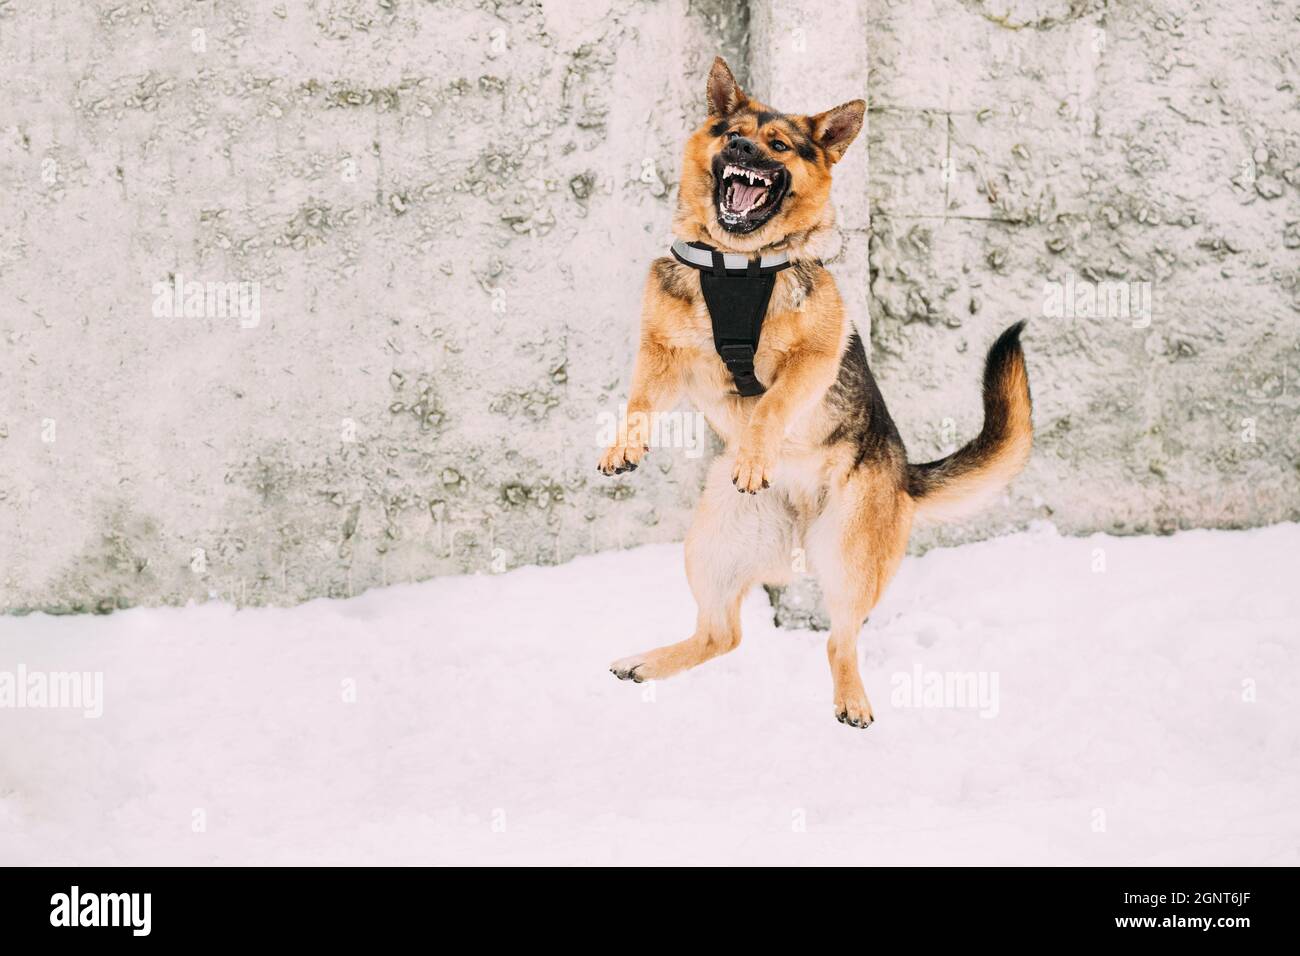 Training Of Purebred German Shepherd Dog In Special Outfit. Alsatian Wolf Dog Jumping During Exercise. Attack And Defence. Winter Snowy Day Stock Photo